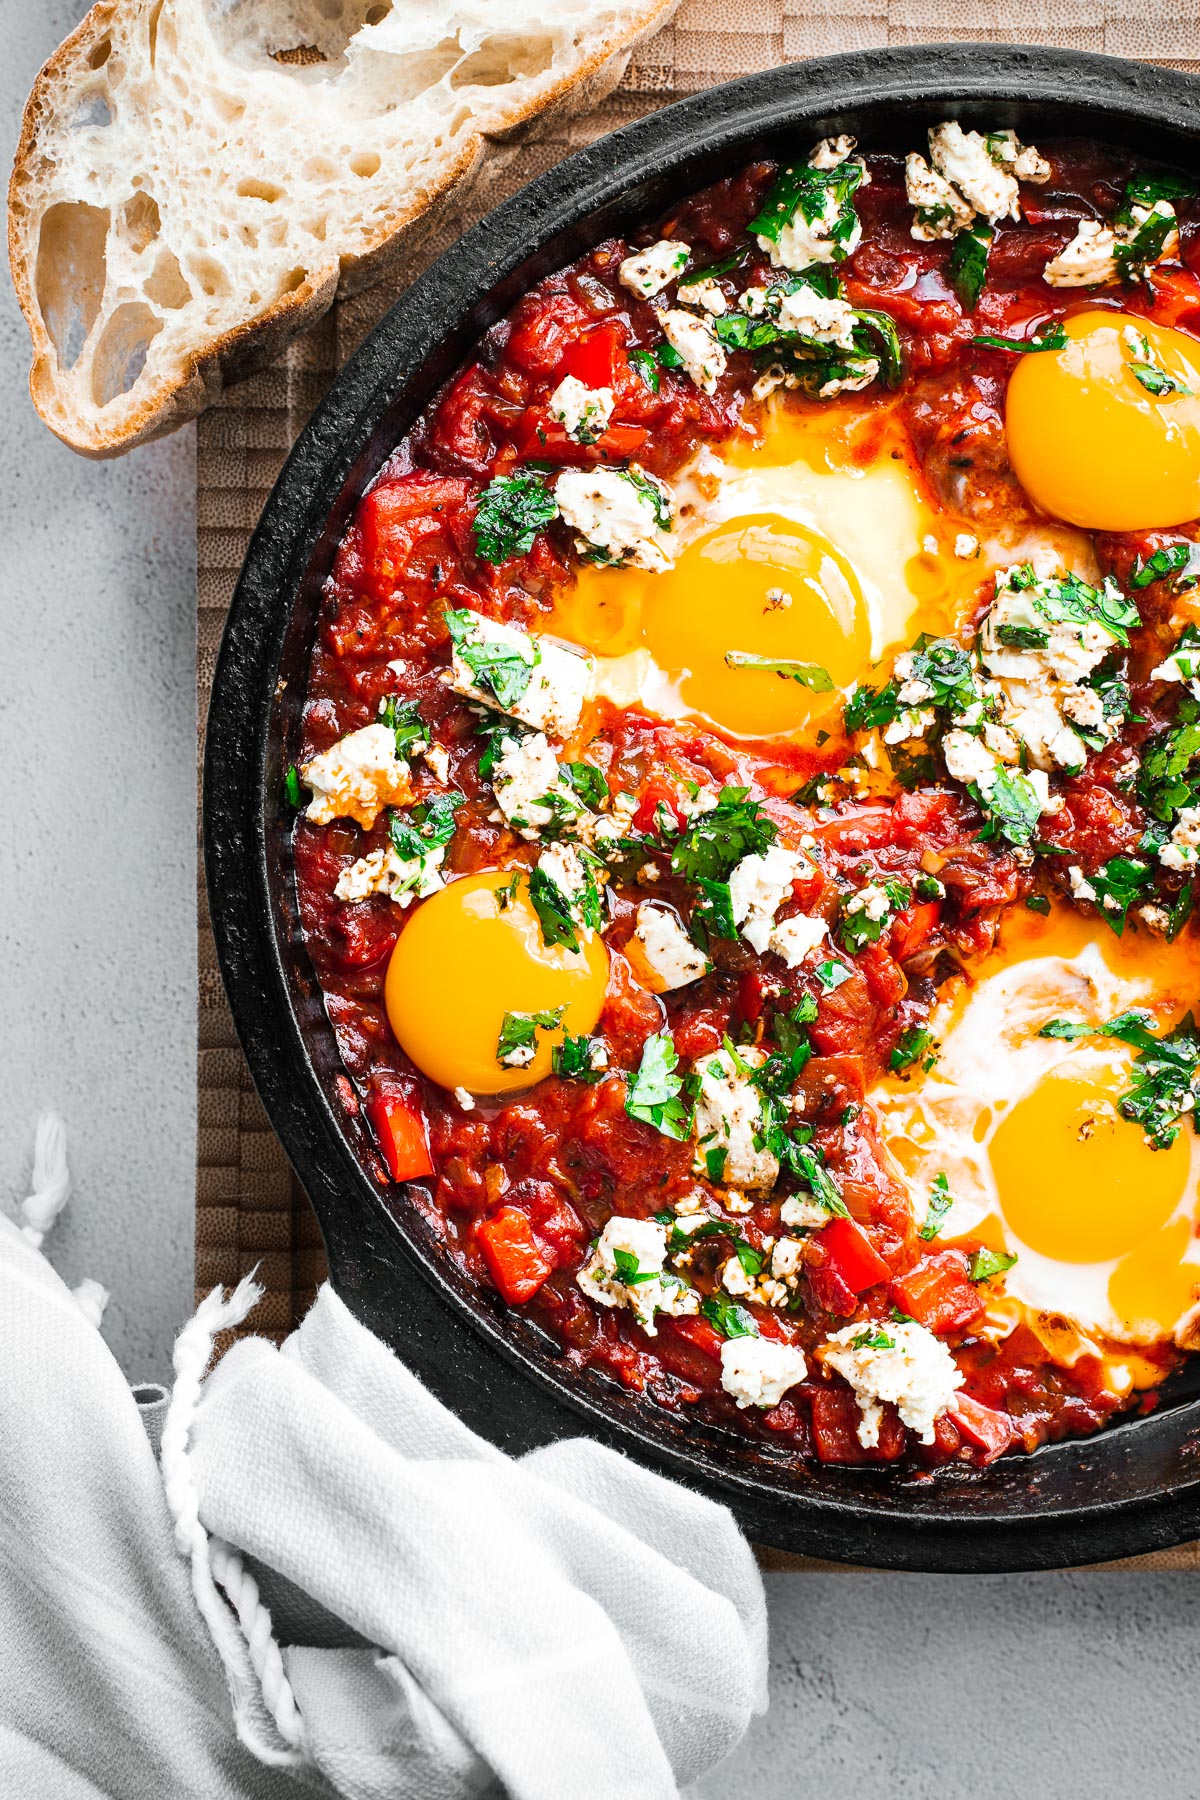 Harissa shakshuka with whole eggs and egg yolk and feta in a cast iron skillet viewed from above.